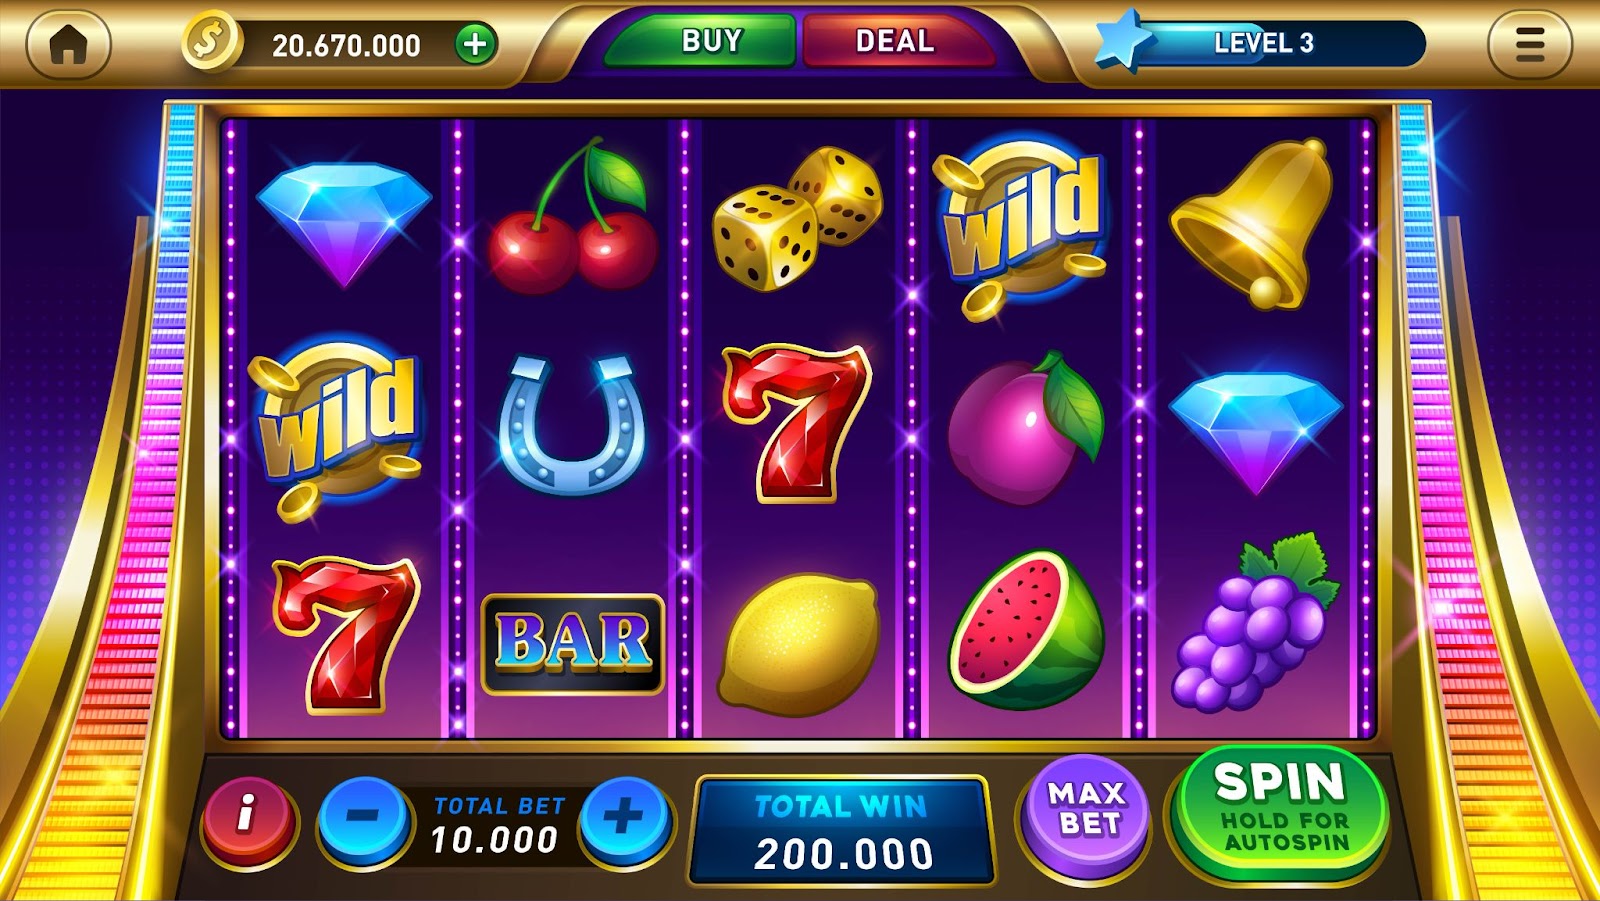 A vibrant screen capture of a virtual slot machine game displaying various symbols like fruits, bells, and wilds with buttons for gameplay options.